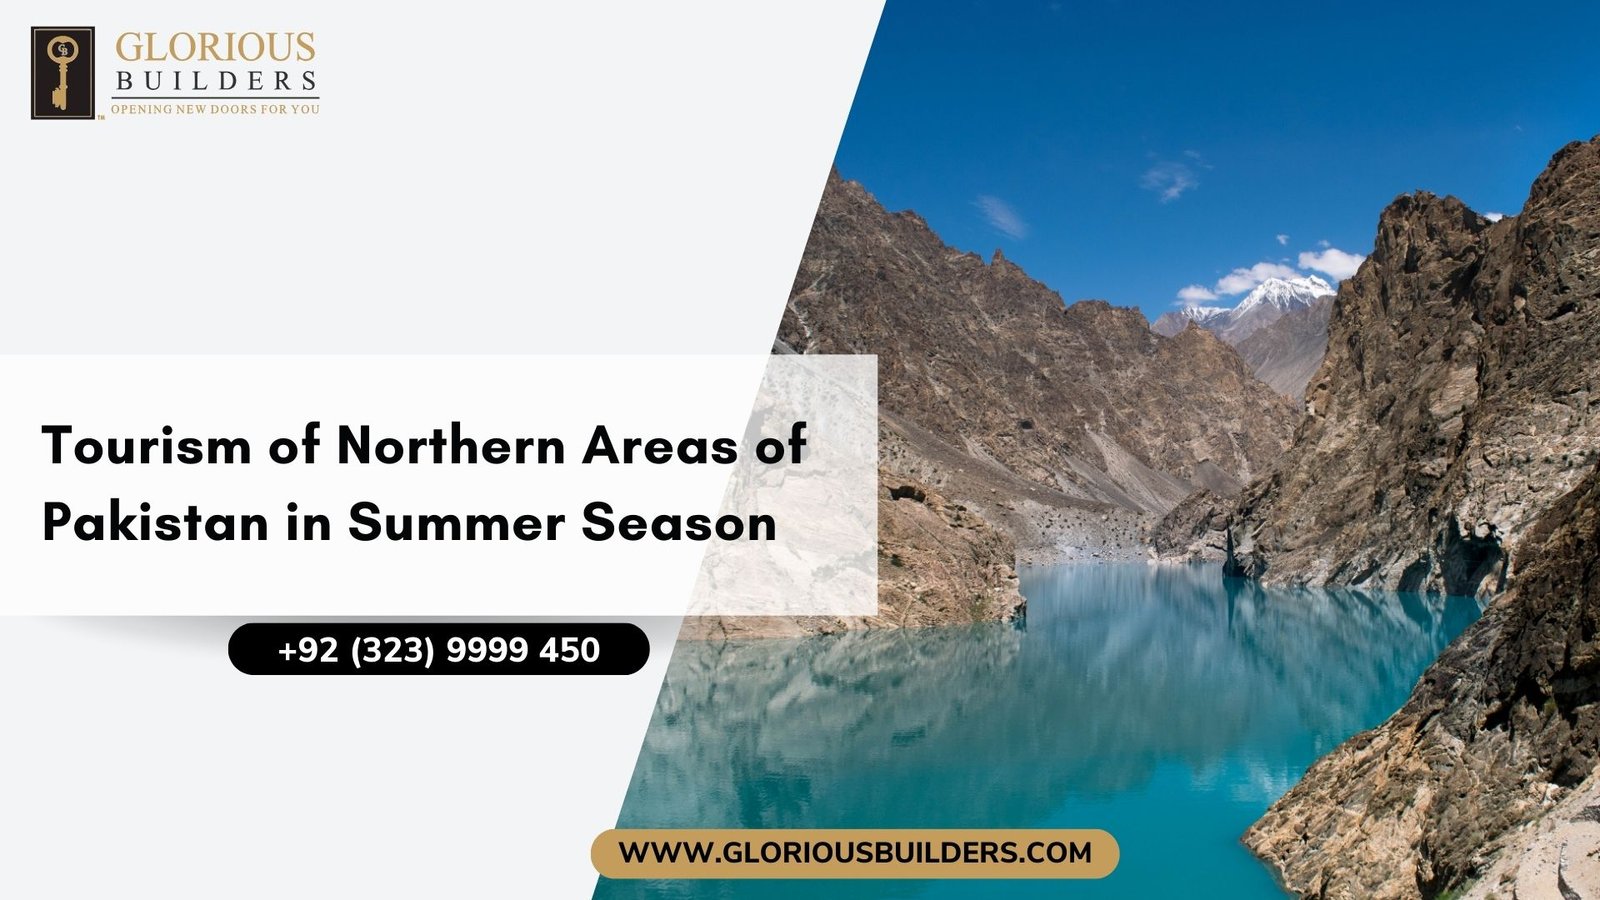 Tourism of Northern Areas of Pakistan in Summer Season